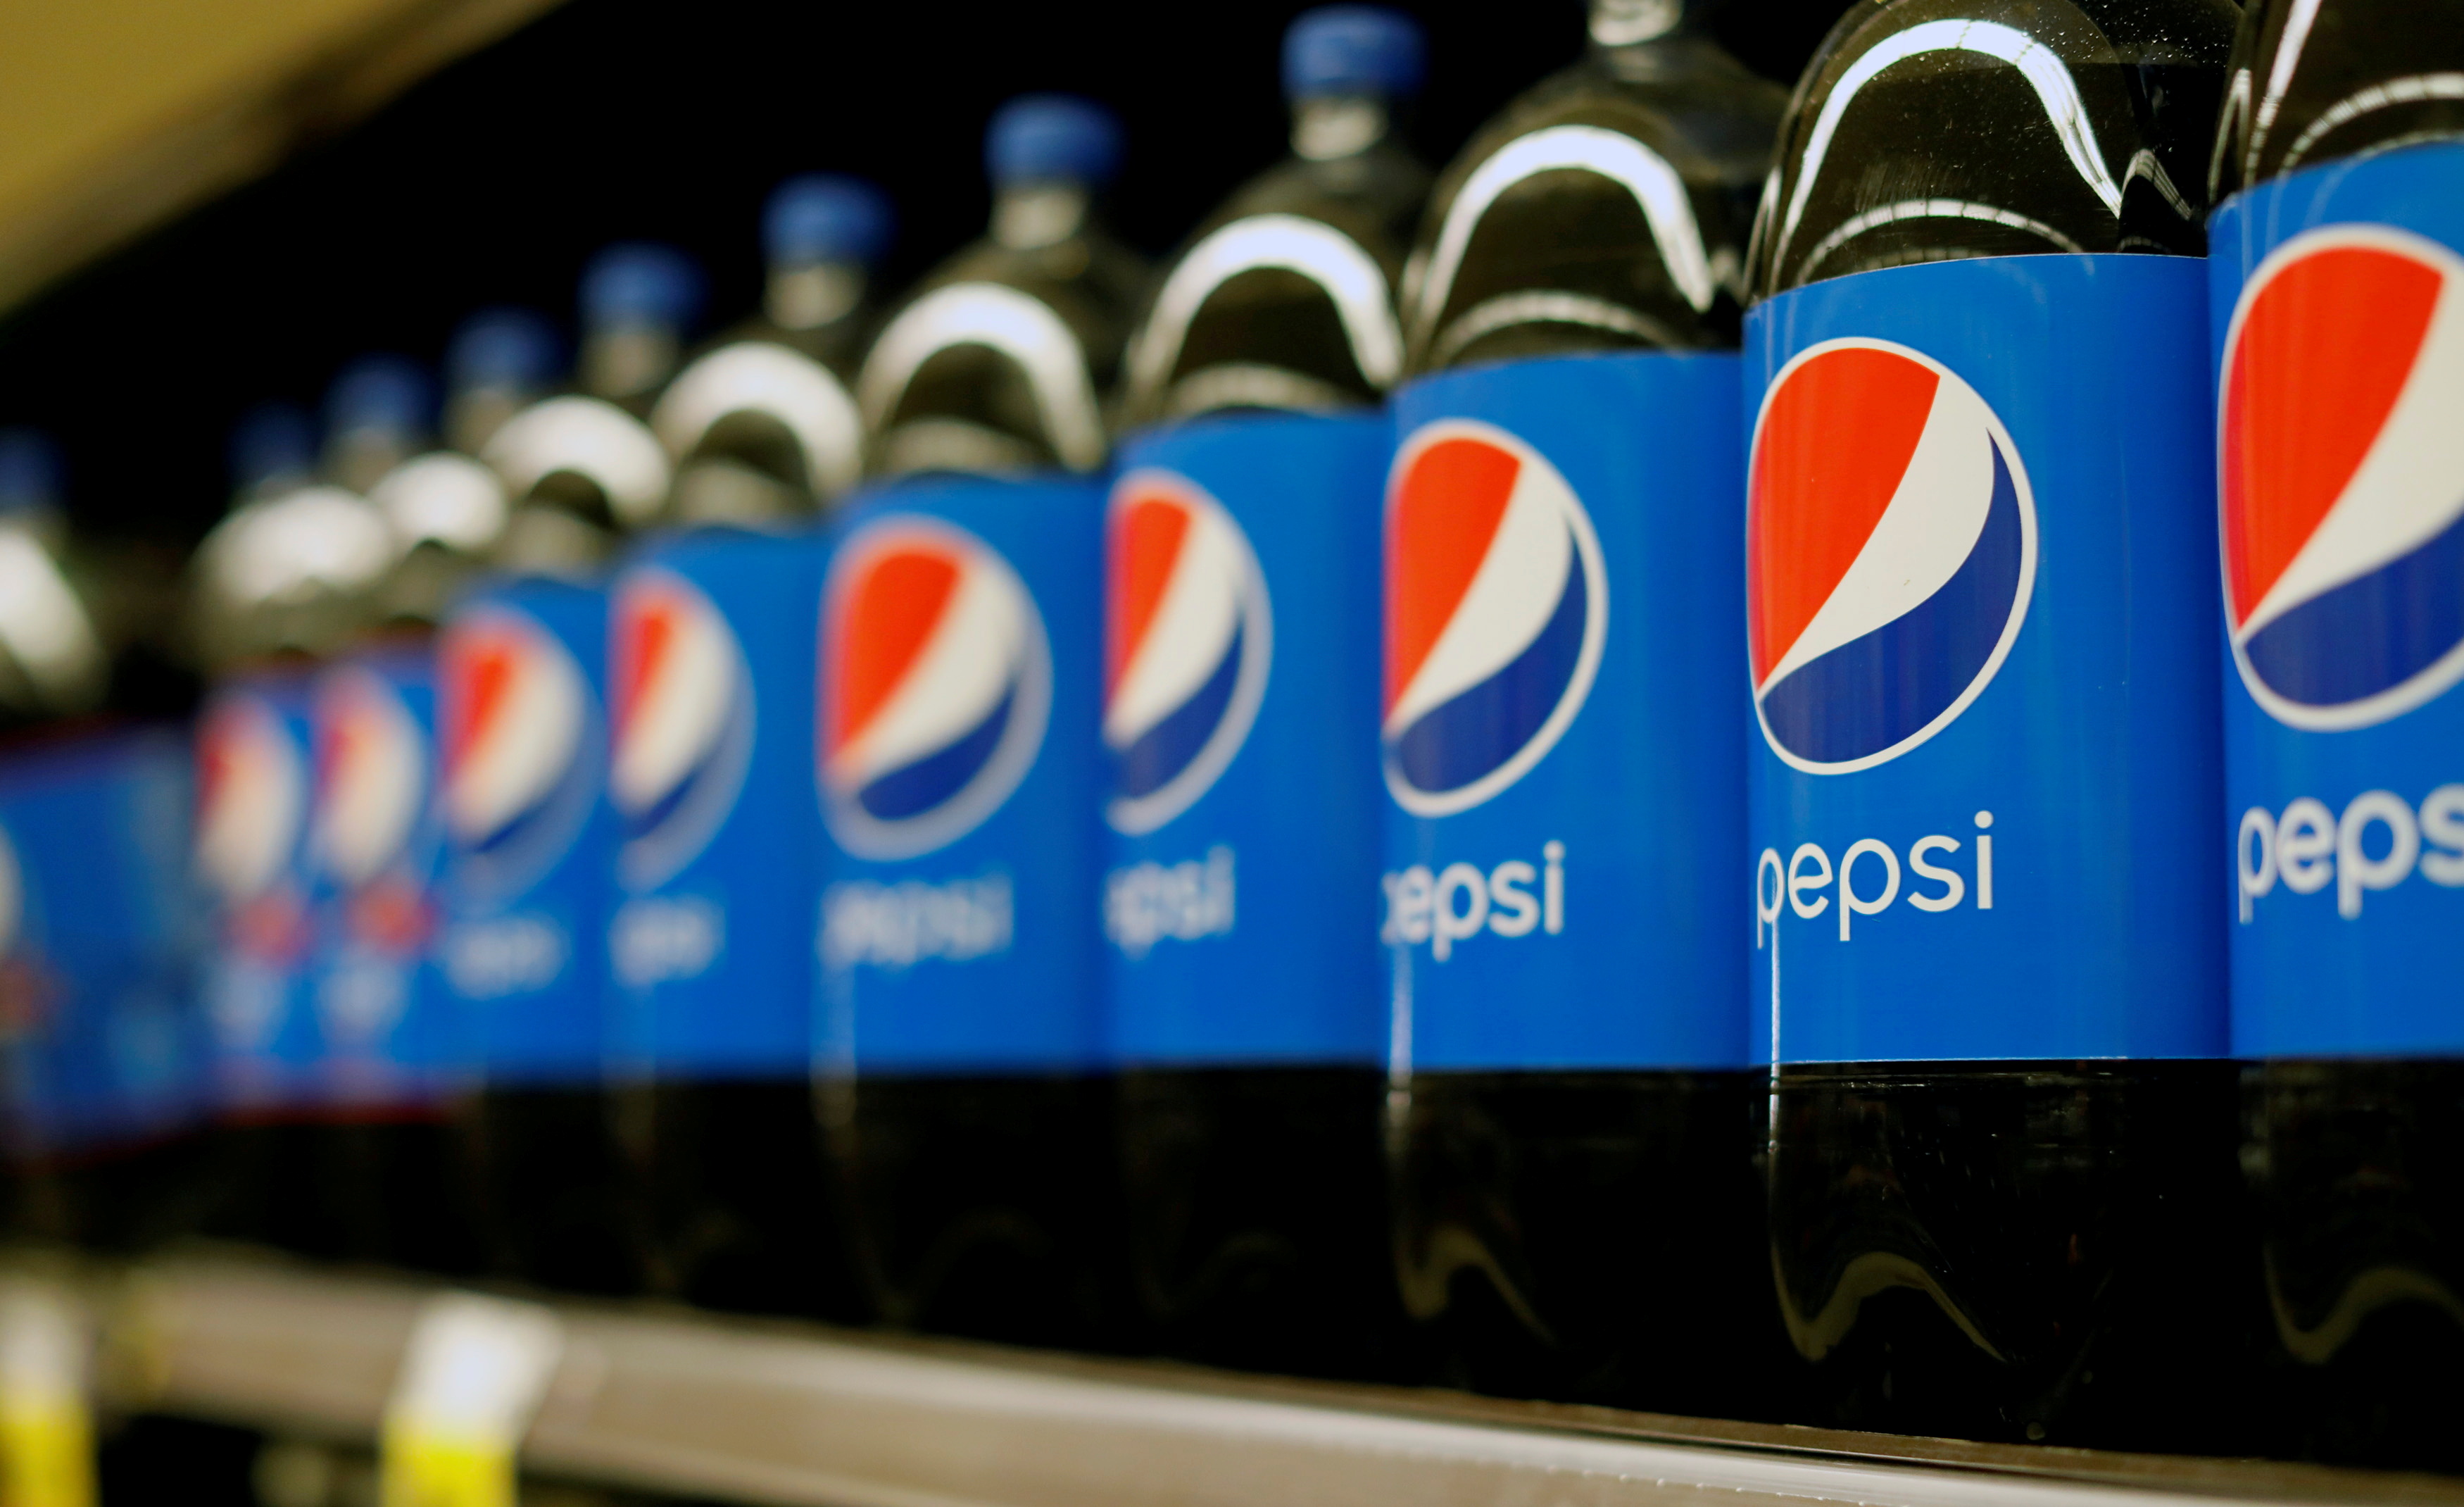 Bottles of Pepsi are pictured at a grocery store in Pasadena, California, U.S., July 11, 2017.   REUTERS/Mario Anzuoni